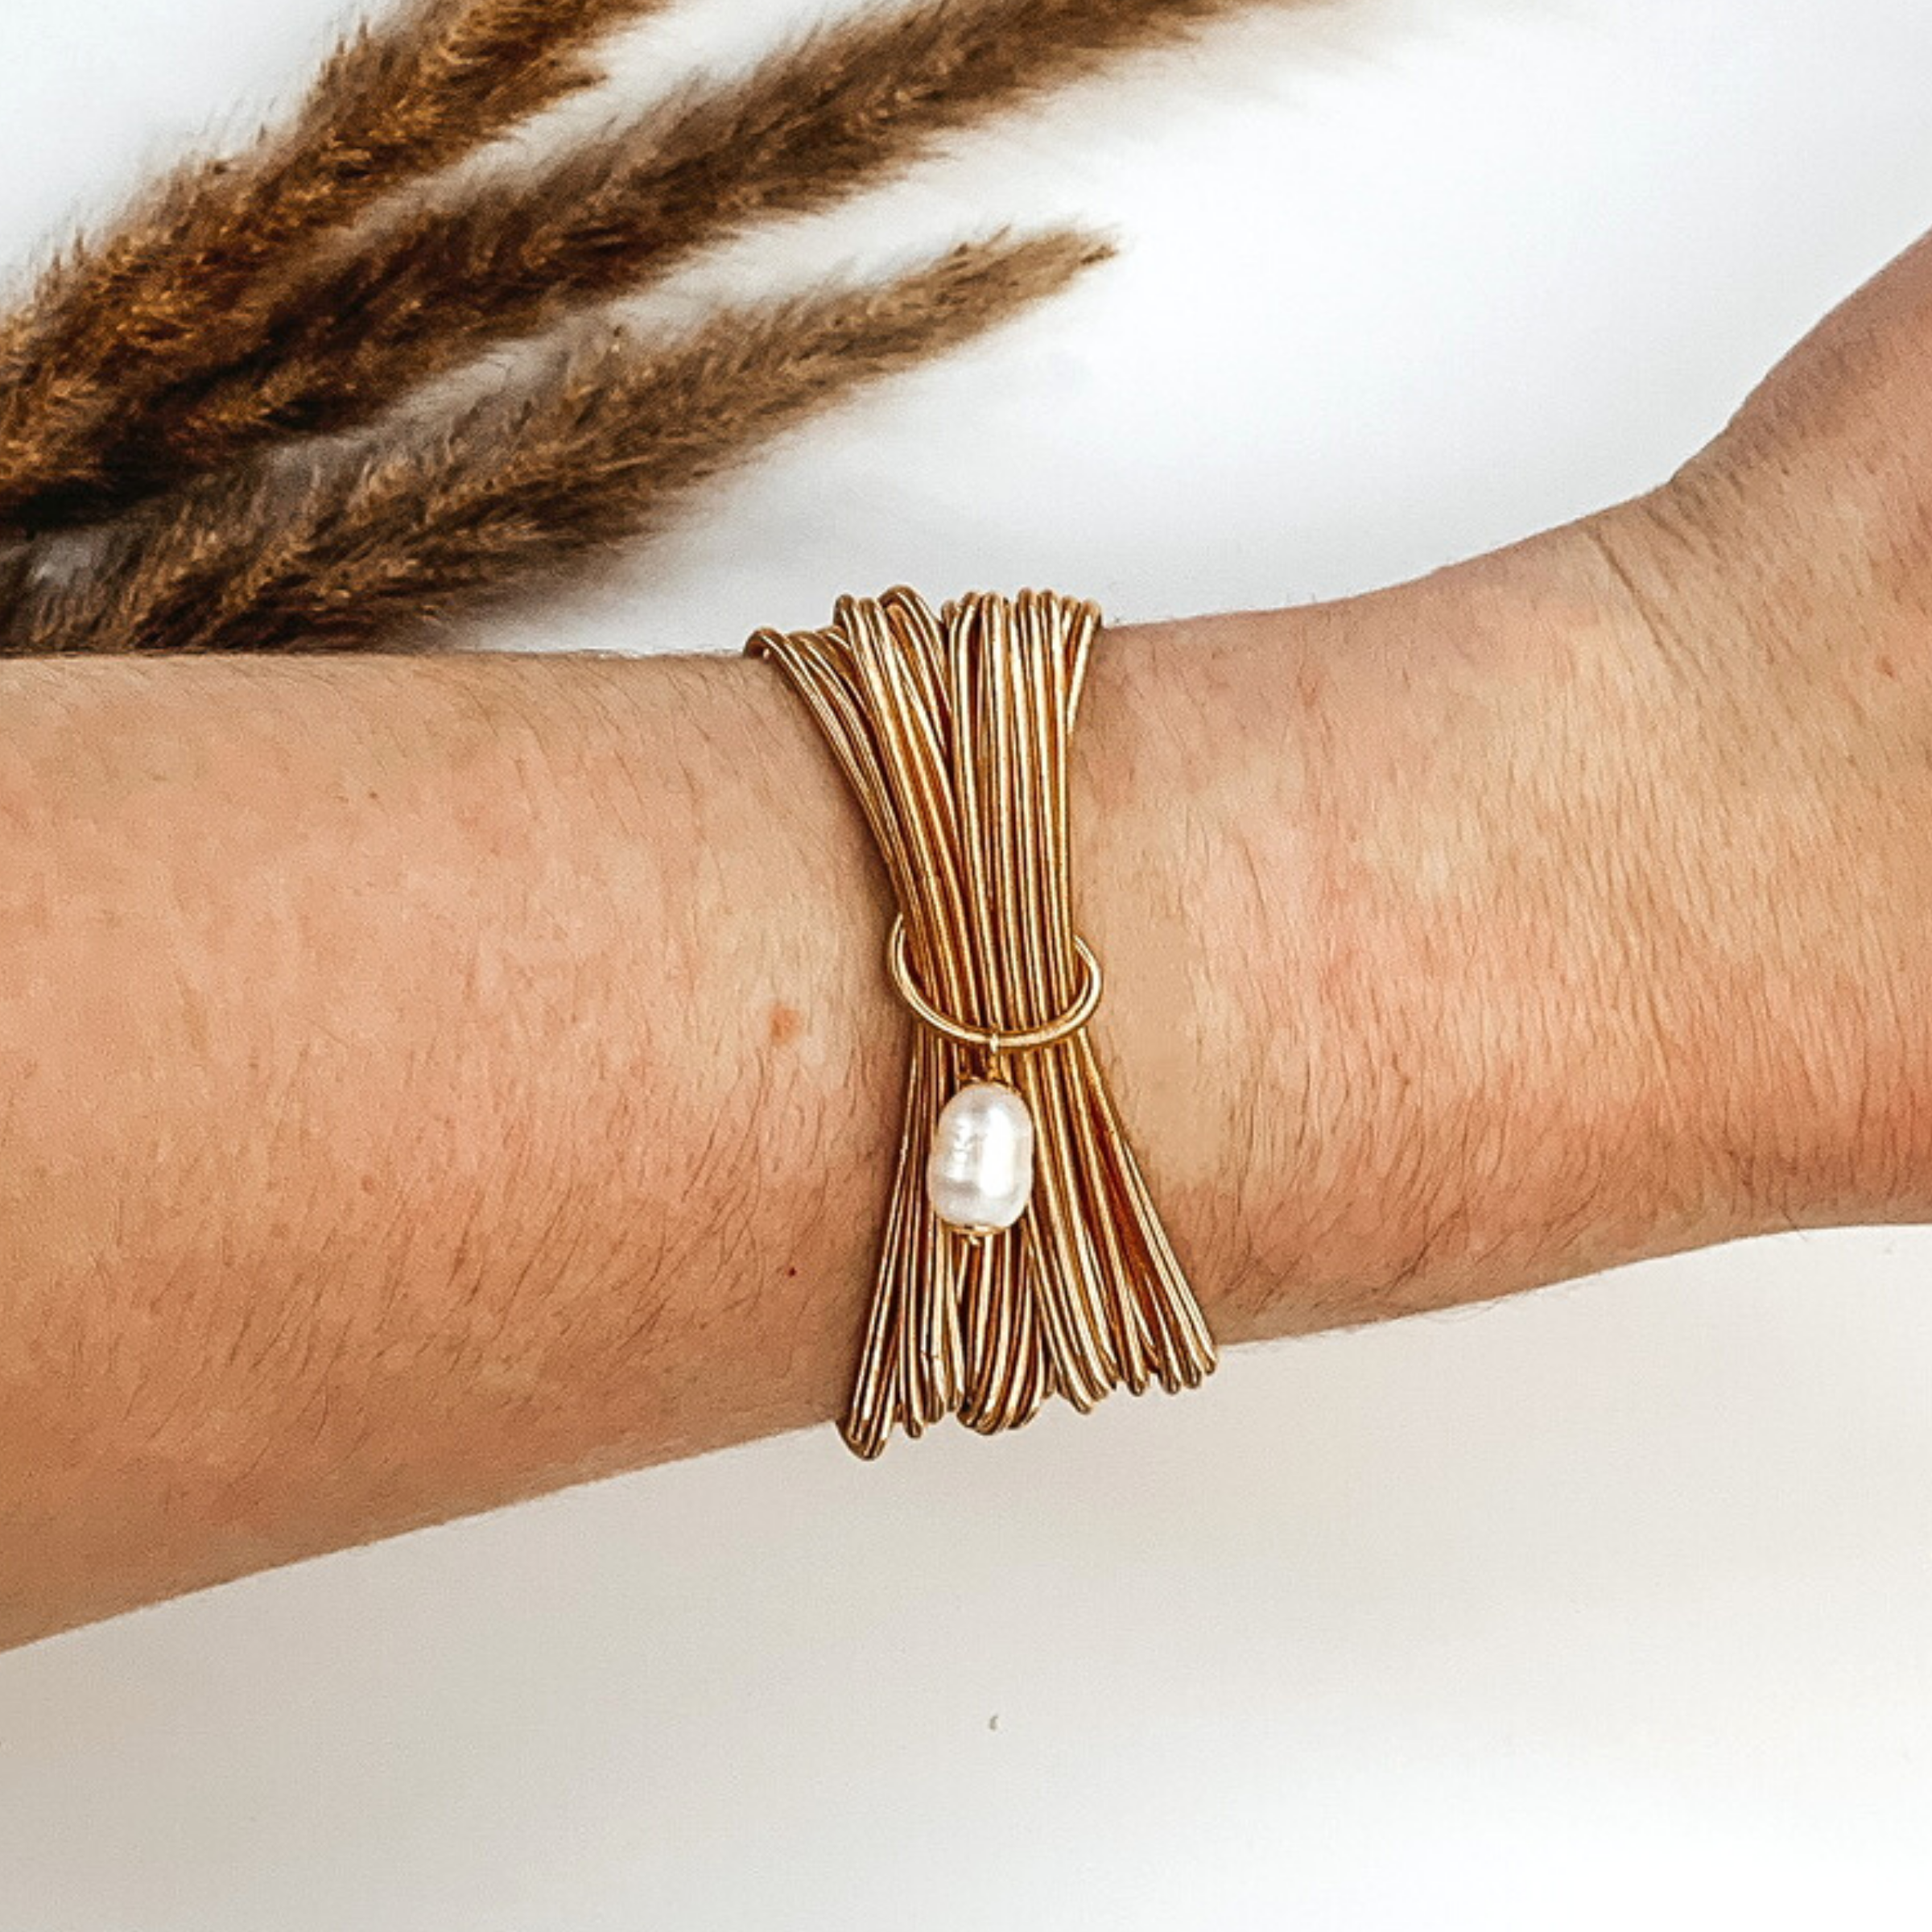 Guitar String Elastic Bracelet Set in Gold with a Pearl Charm - Giddy Up Glamour Boutique